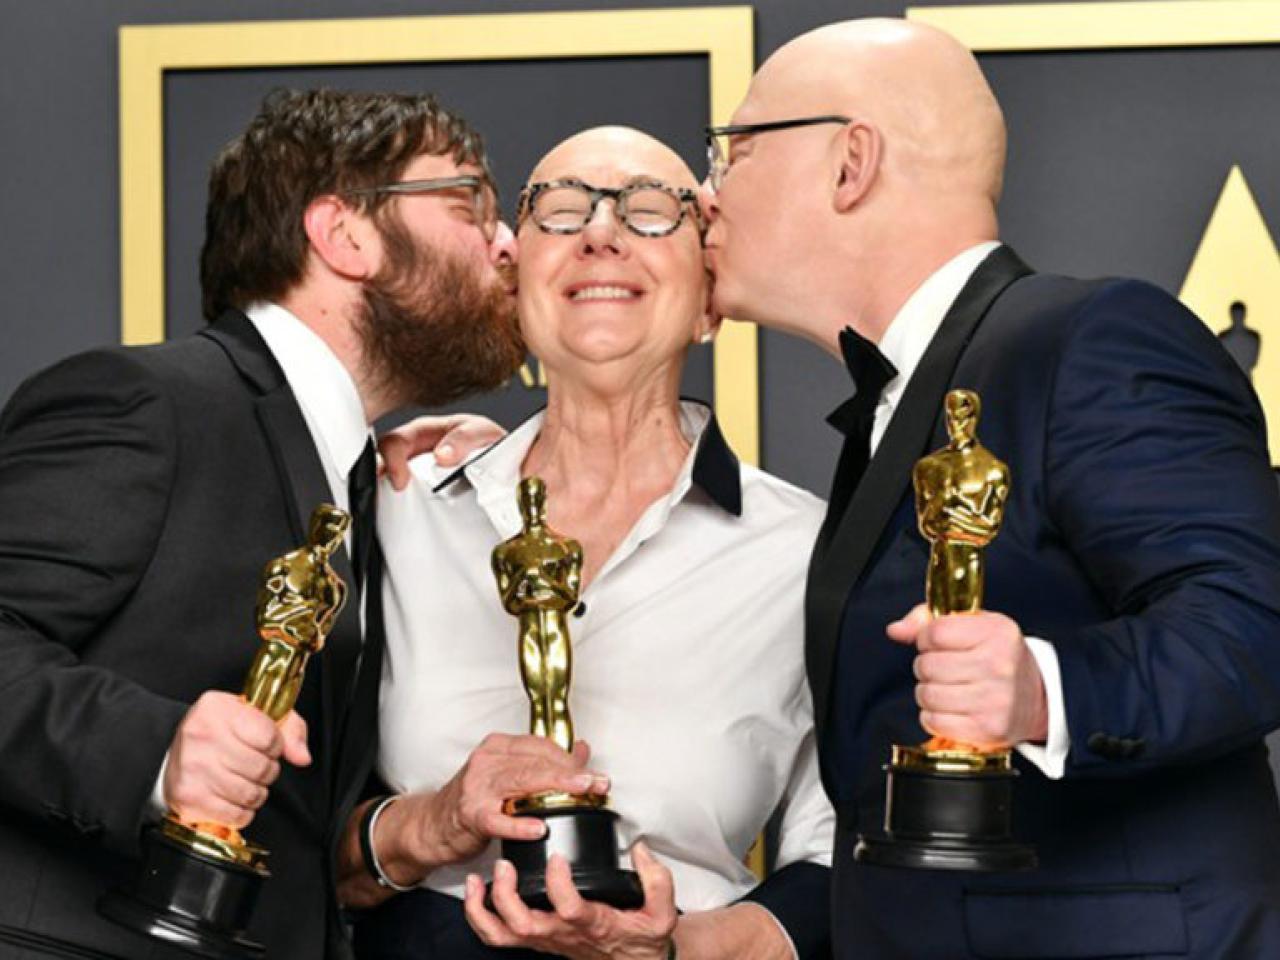 Julia Reichart, with a bald head and round glasses, holds an Oscar. She smiles with her eyes closed, and is kissed the men on either side of her, each holding an Oscar statue.